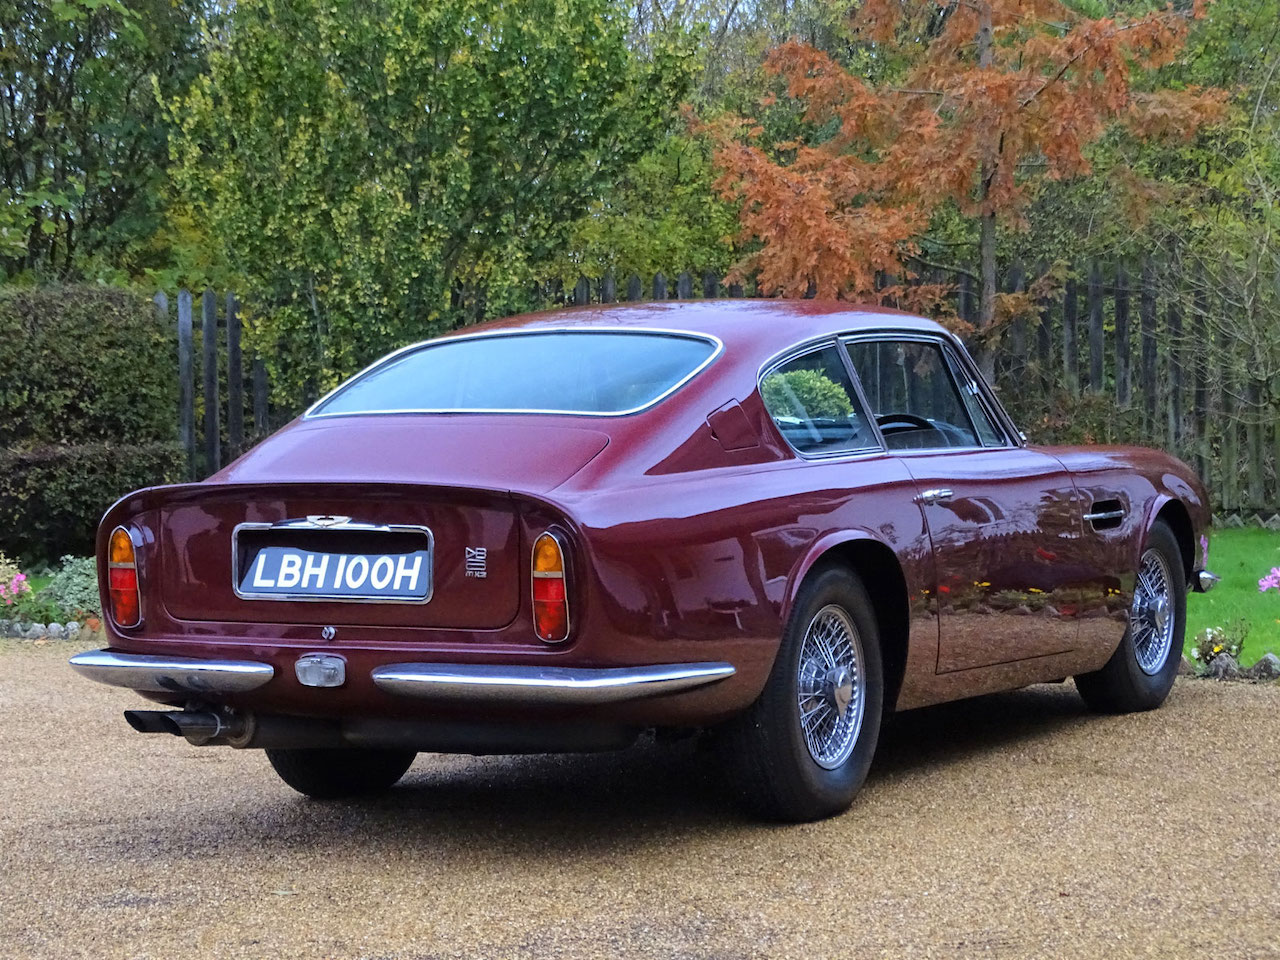 Ex Works Aston Martin DB6 with Royal connection at H&H Sale